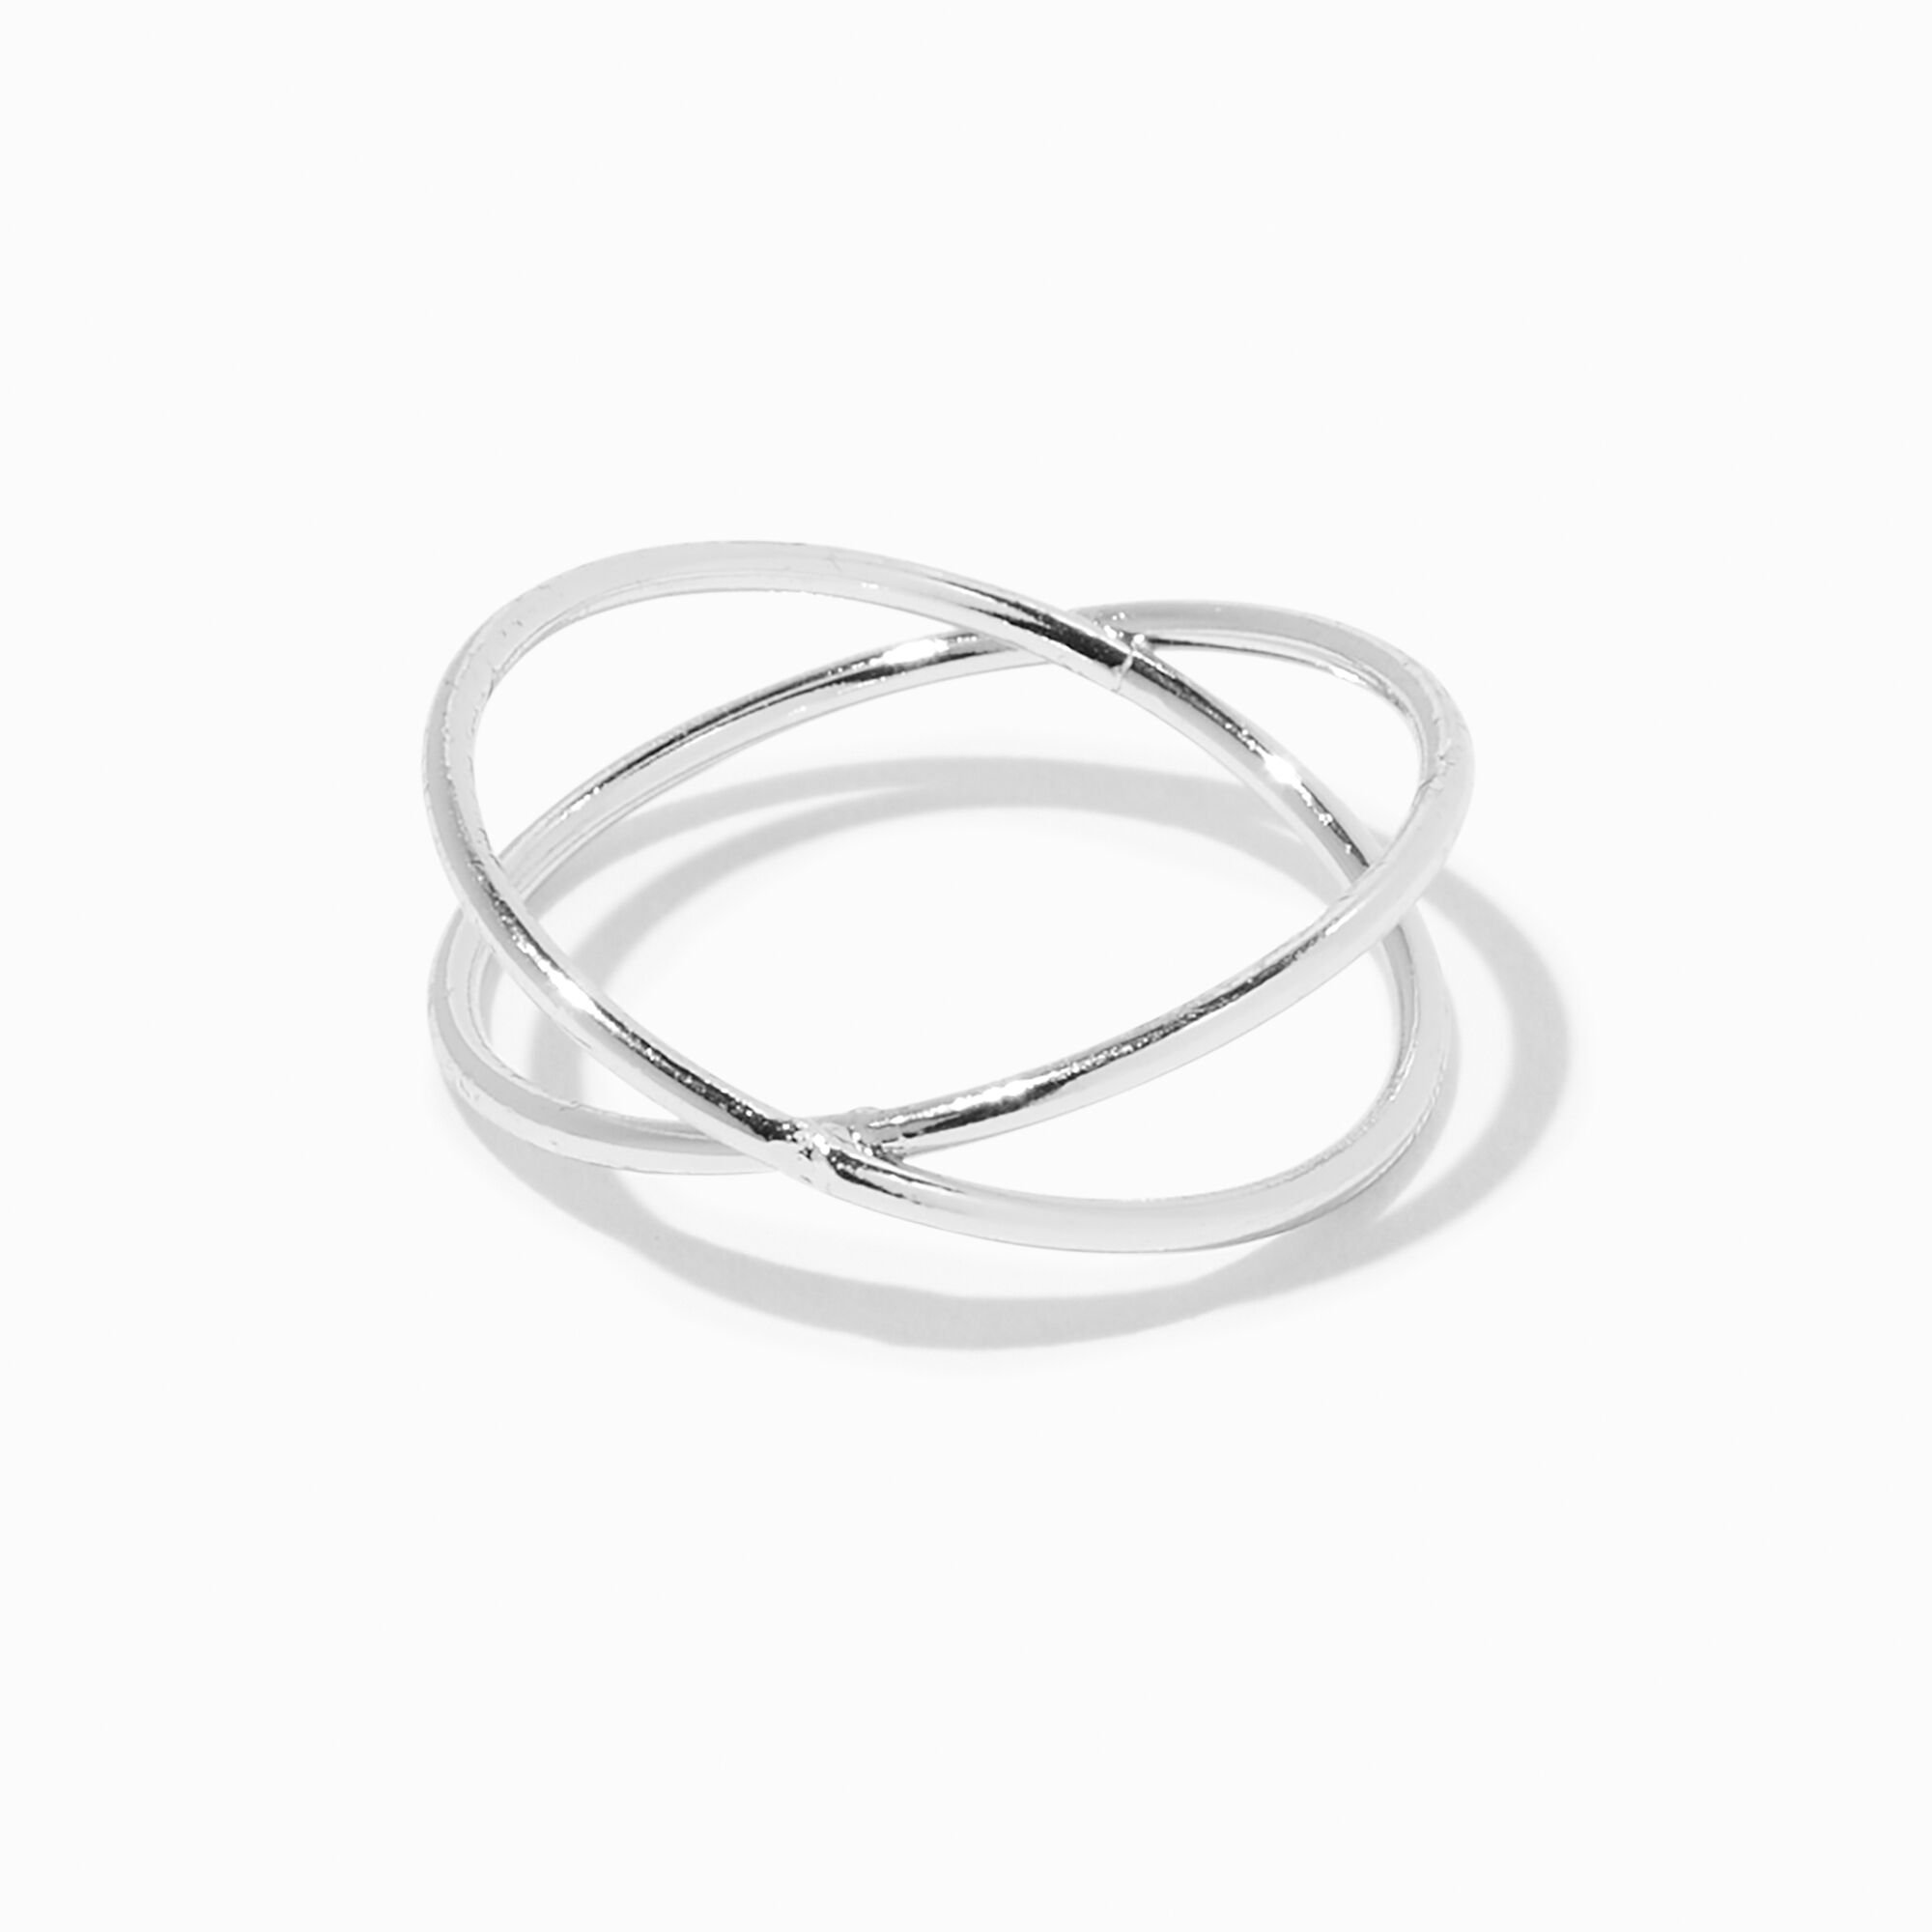 View Claires Criss Cross Ring Silver information